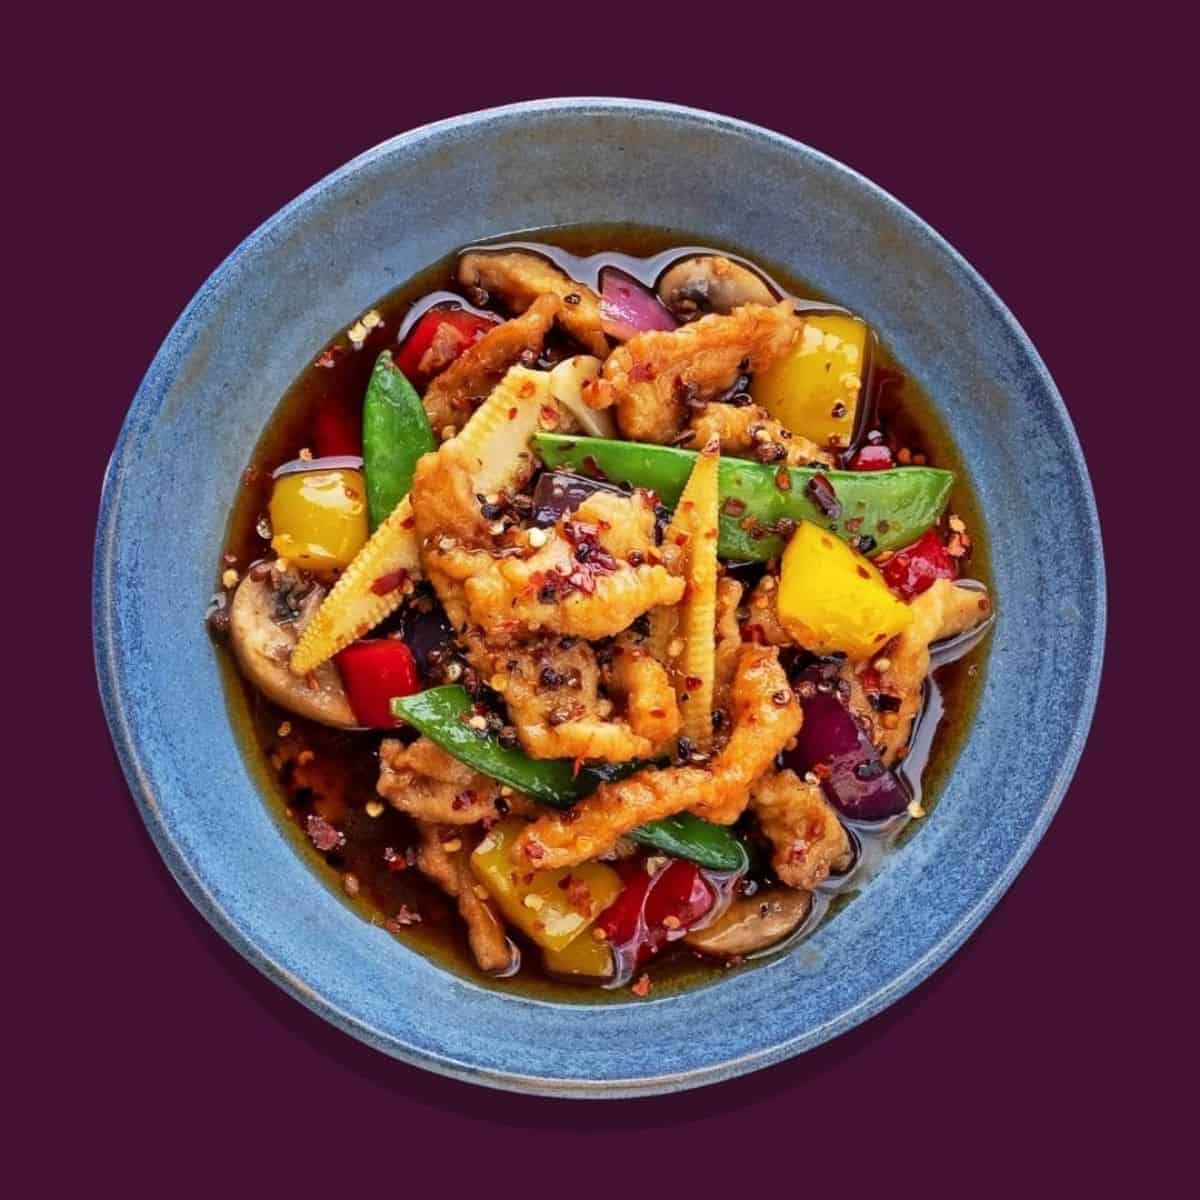 Szechuan chicken using chilli flakes and soy sauce